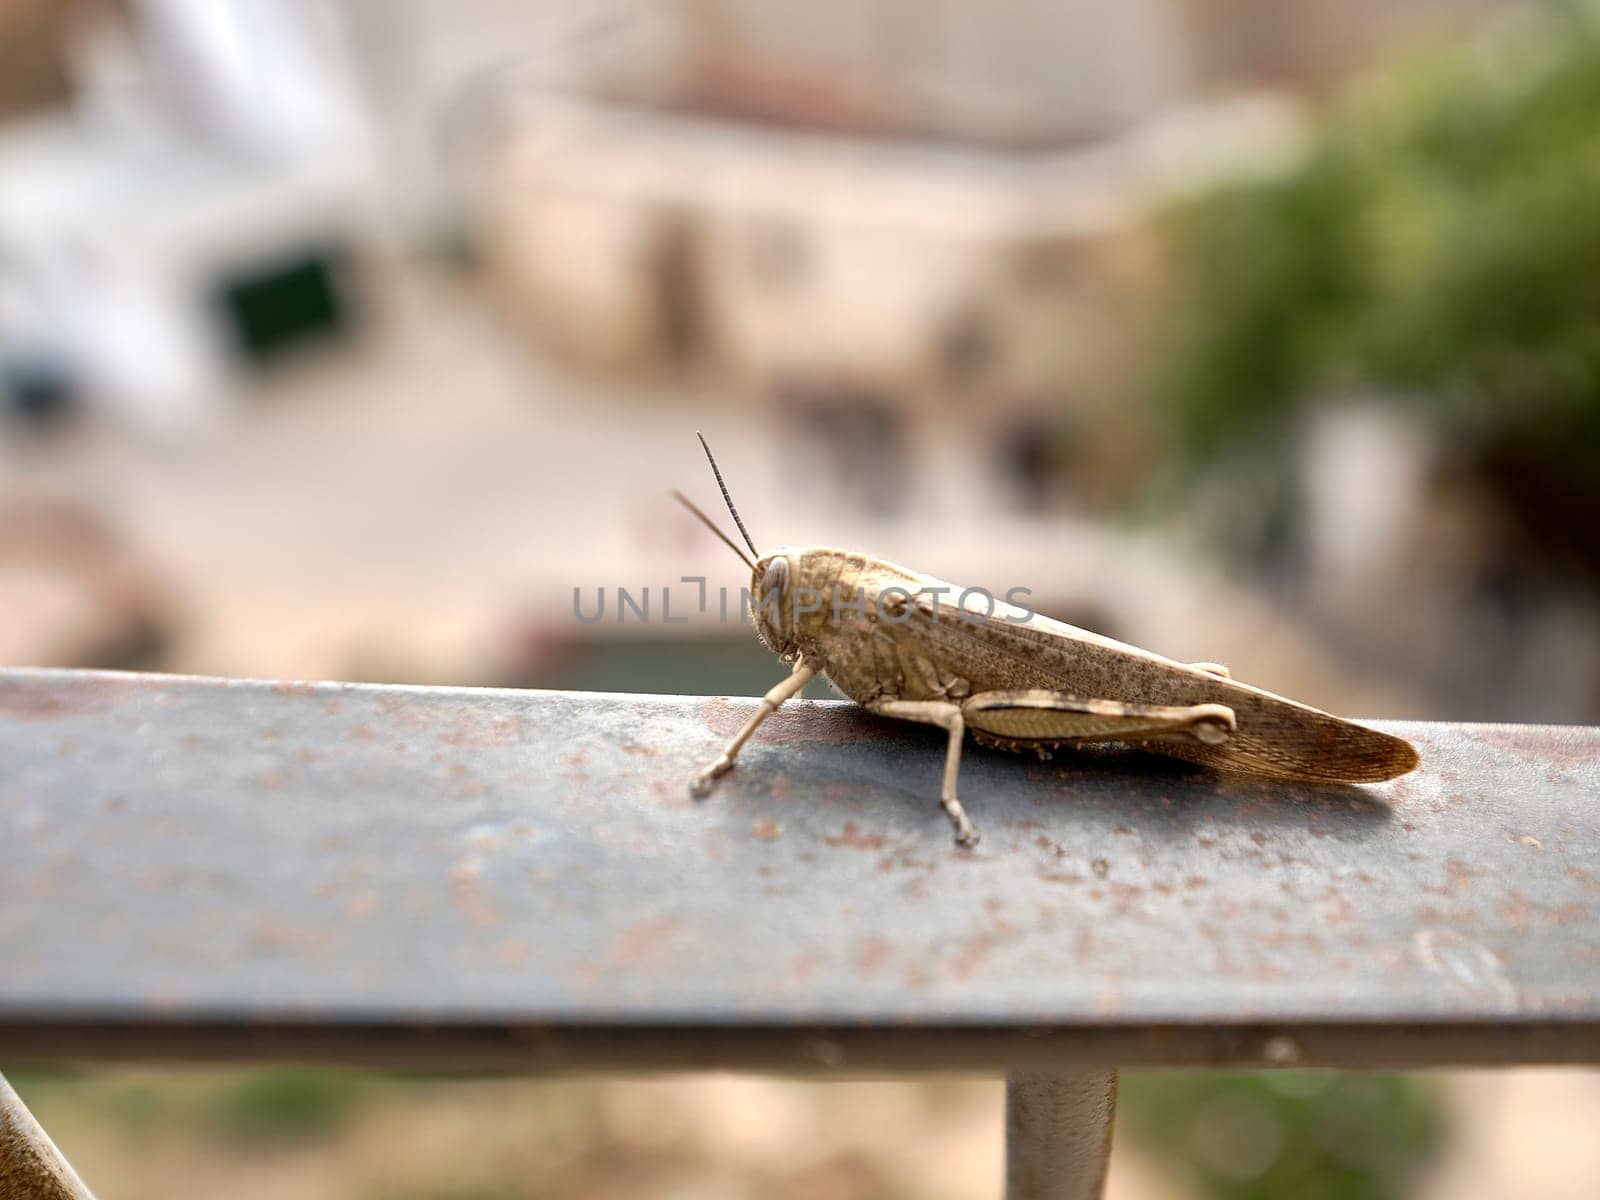 A grasshopper on a metal fence, background out of focus.Detail and macro photography, texture,